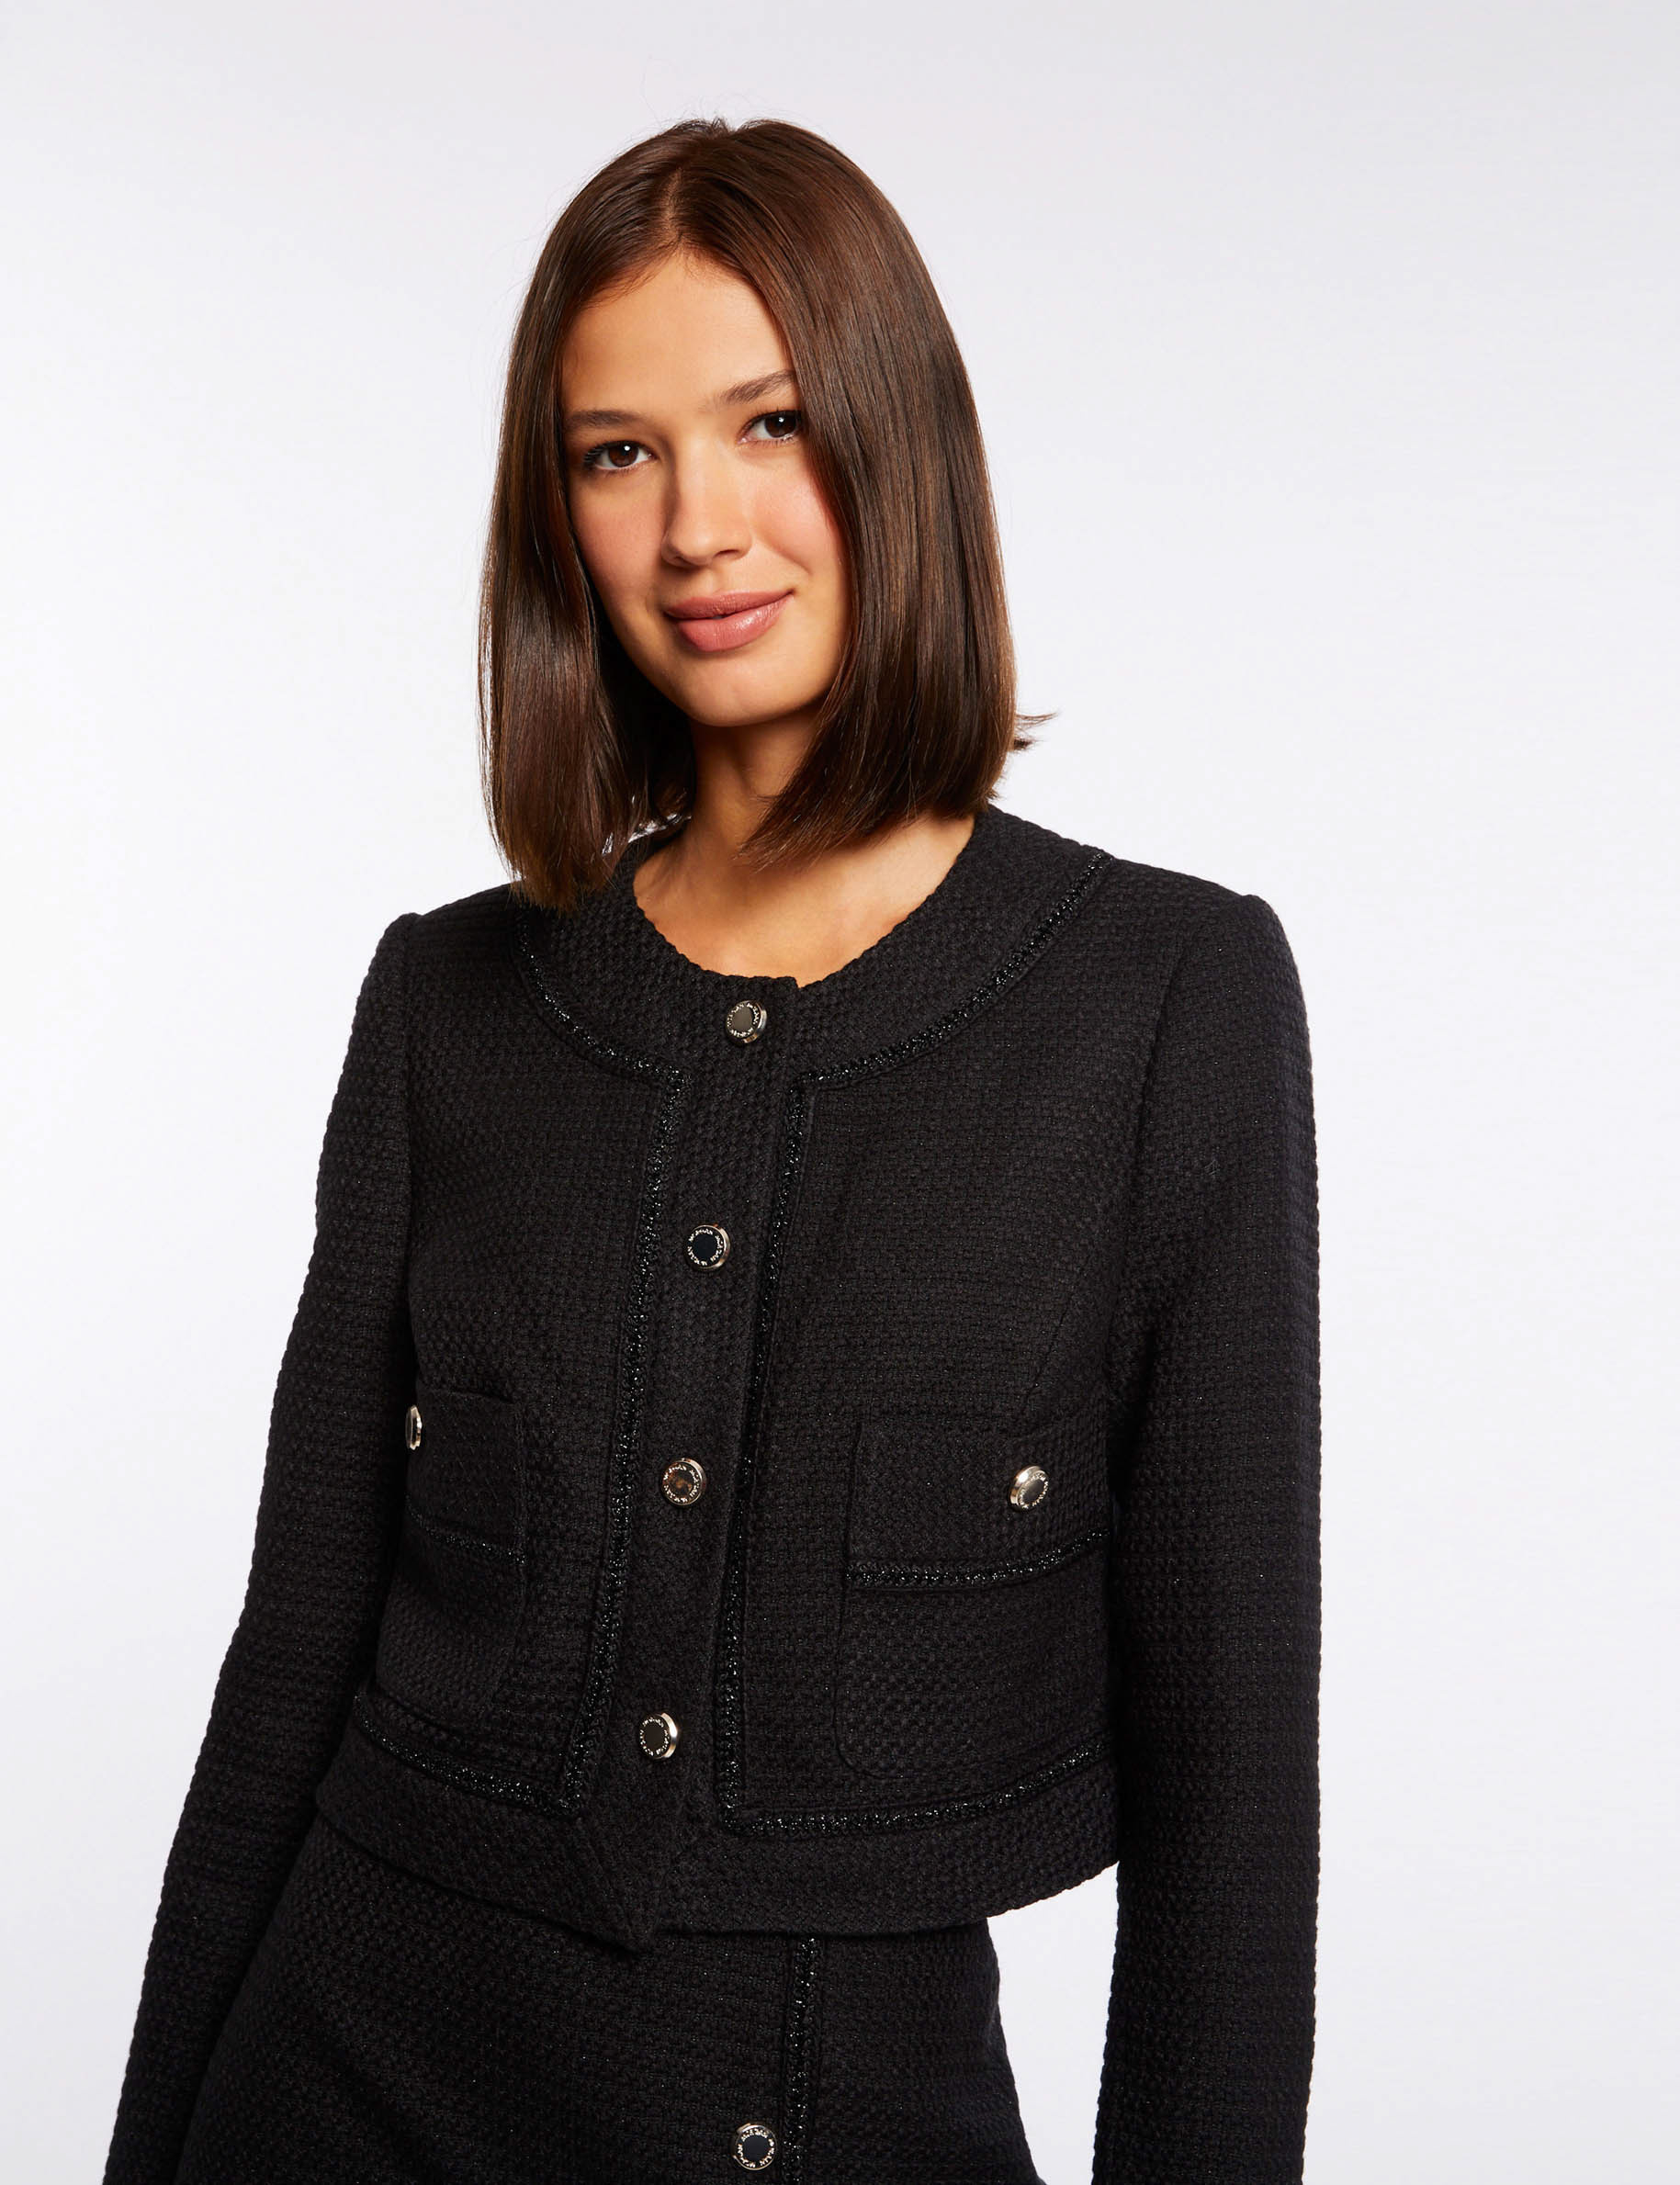 Straight buttoned jacket black ladies'